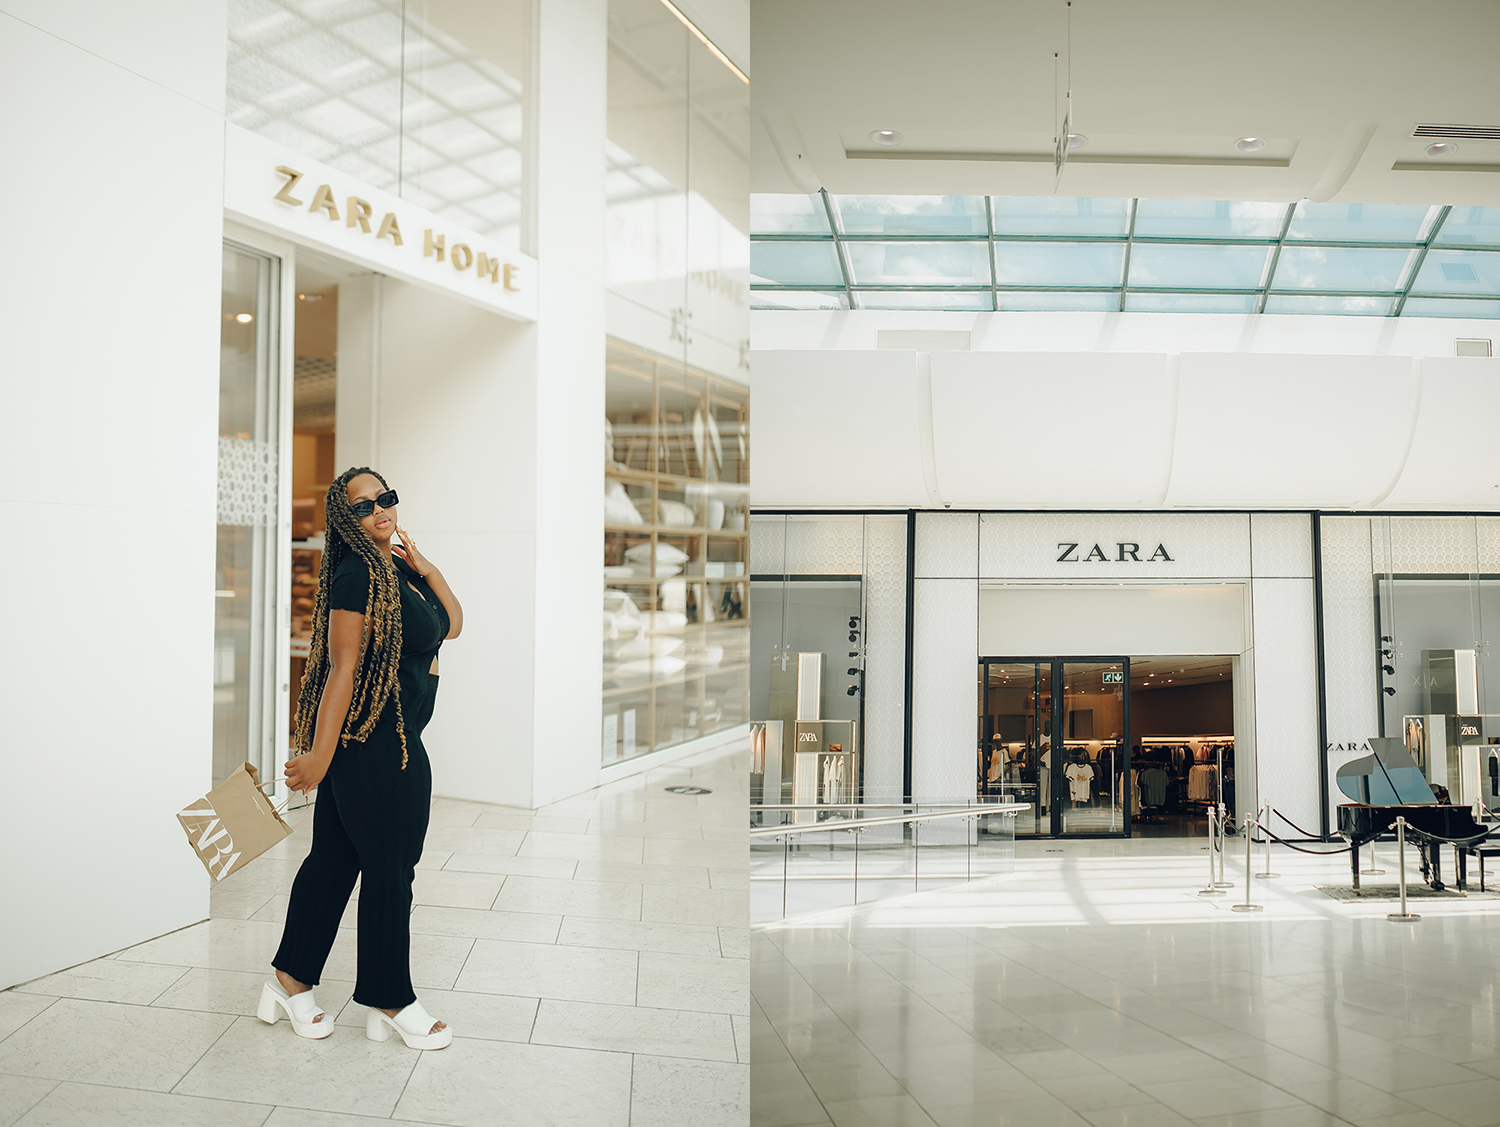 Lwandile Makhaza, lifestyle, influencer, lifestyle influencer, style influencer, south africa, food, drinks, party, johannesburg, joburg, the suite, the suite edit, brutal fruit, thefruitychapters, woman in zara, zara, zara fashion, mall of africa